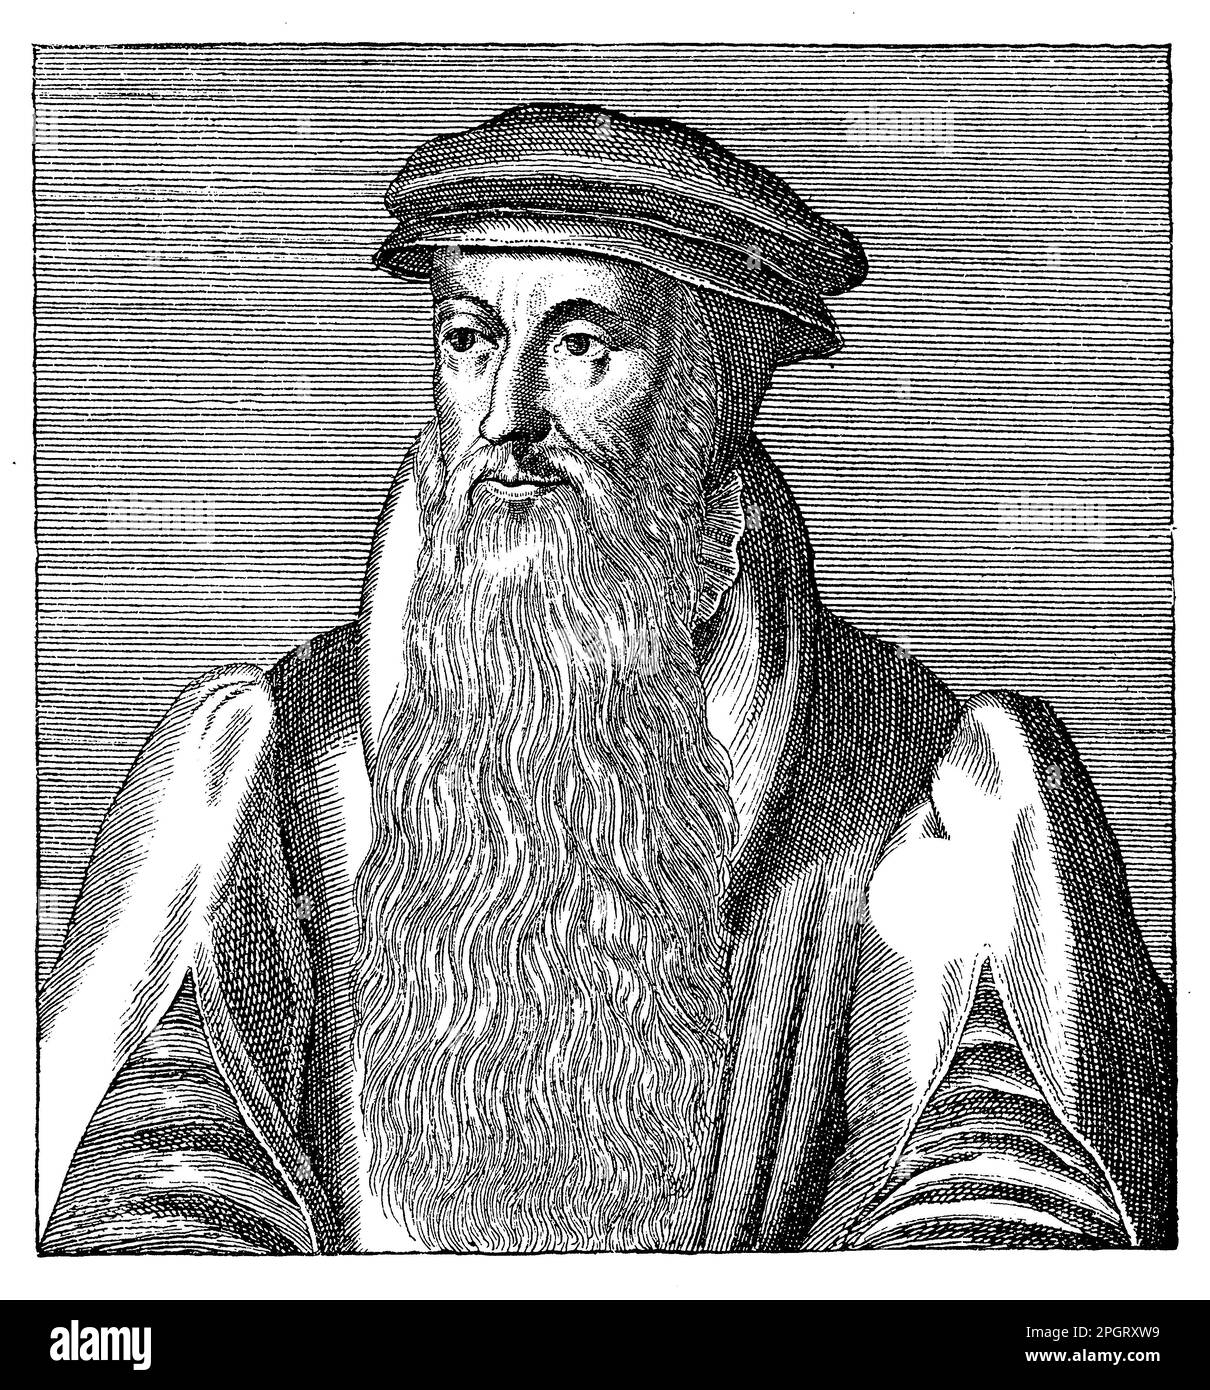 John Knox was a Scottish Protestant reformer who played a significant role in the Scottish Reformation. He lived from c. 1513-1572 and was instrumental in establishing the Presbyterian Church of Scotland. Knox was known for his fiery preaching and his opposition to Mary, Queen of Scots Stock Photo